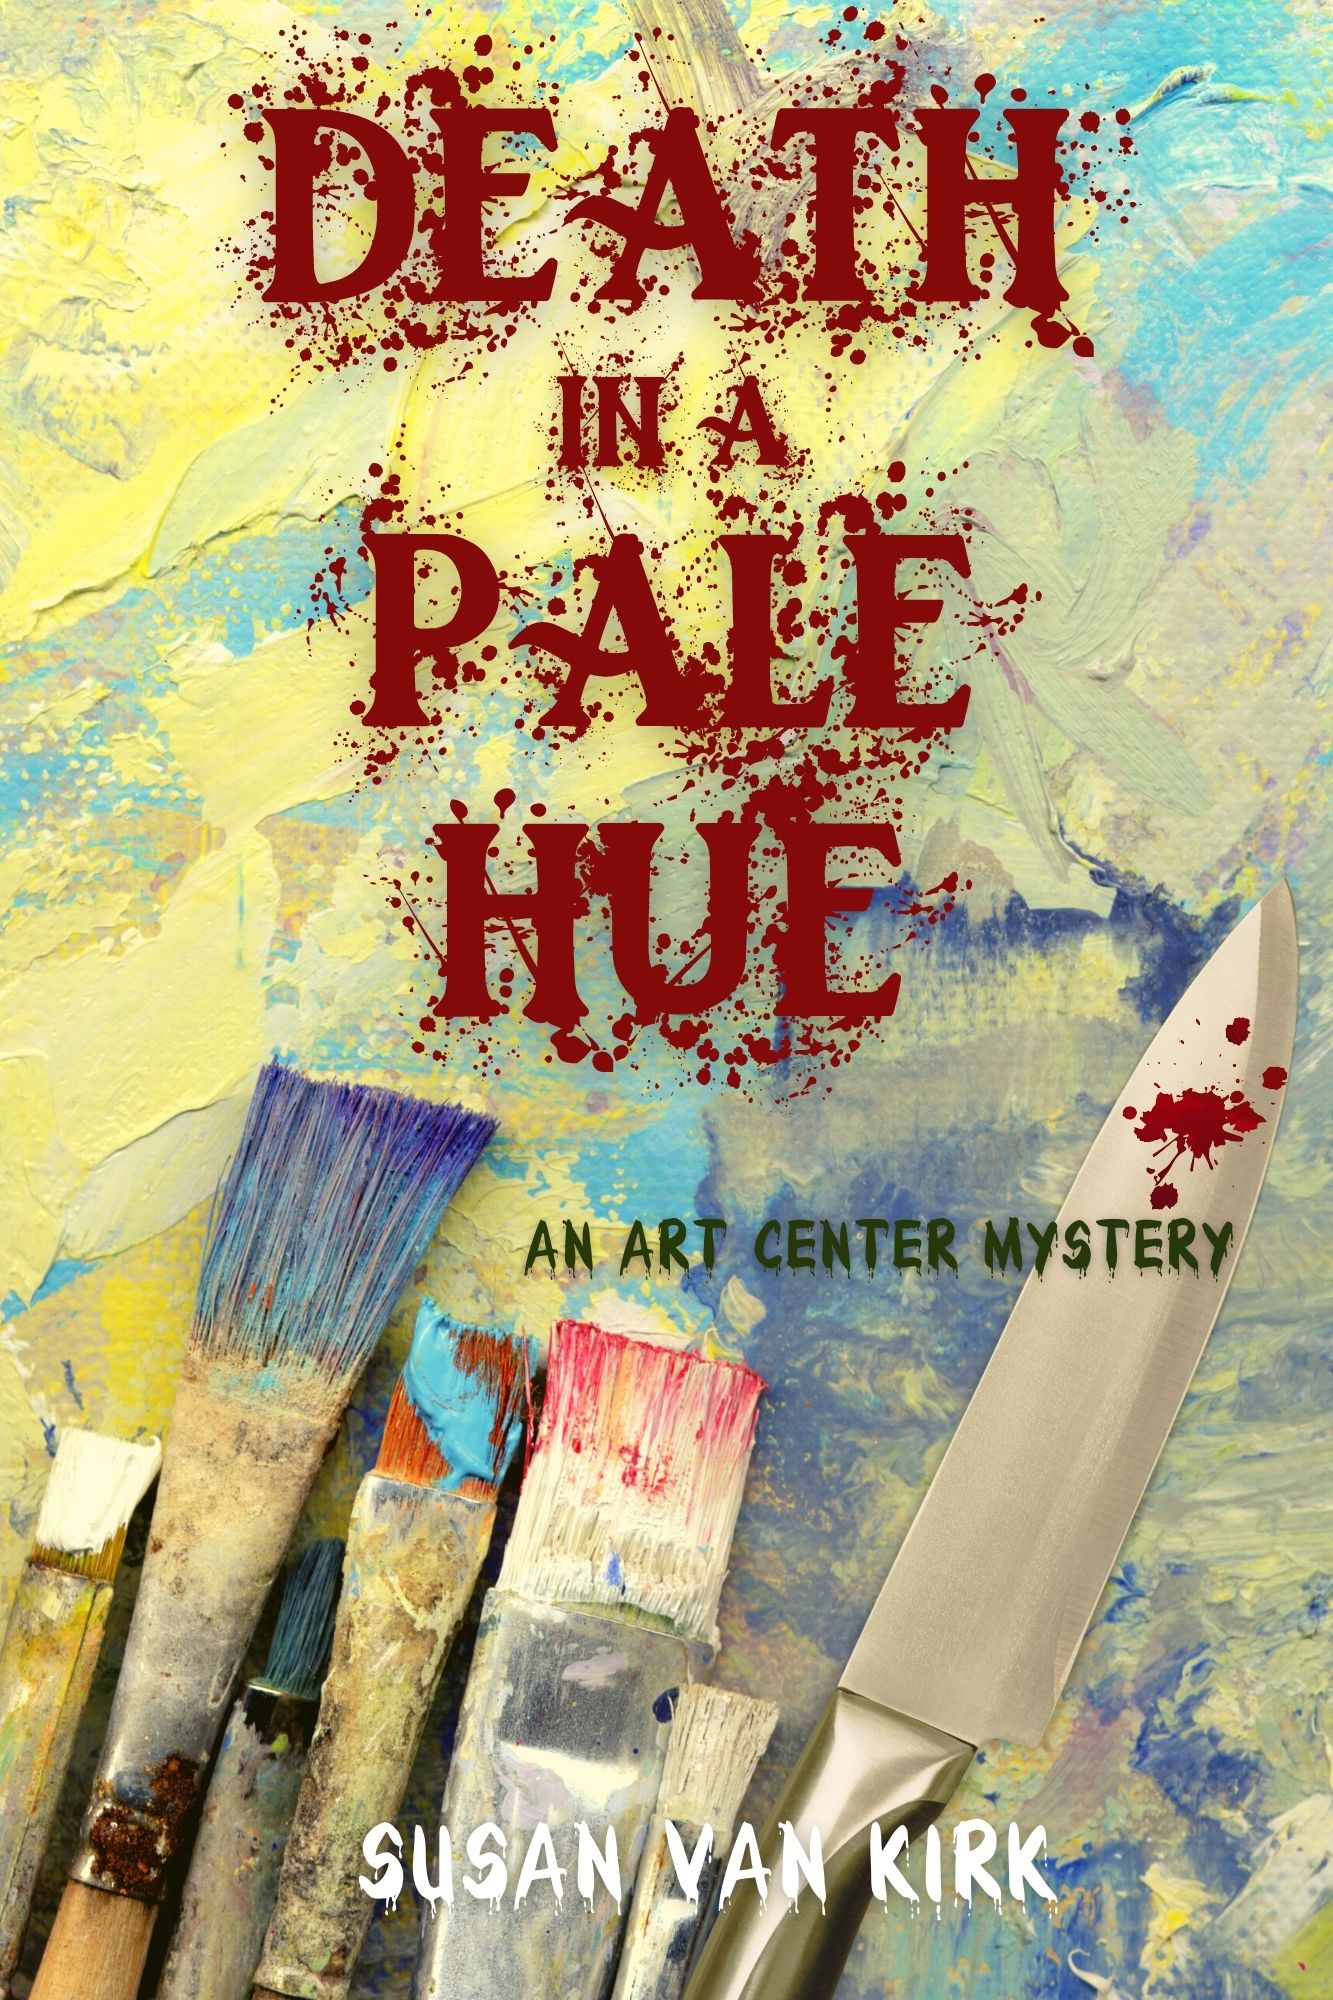 Kathleen Costa Reviews "Death in A Pale Hue" on King's River Life Magazine/Book Giveaway